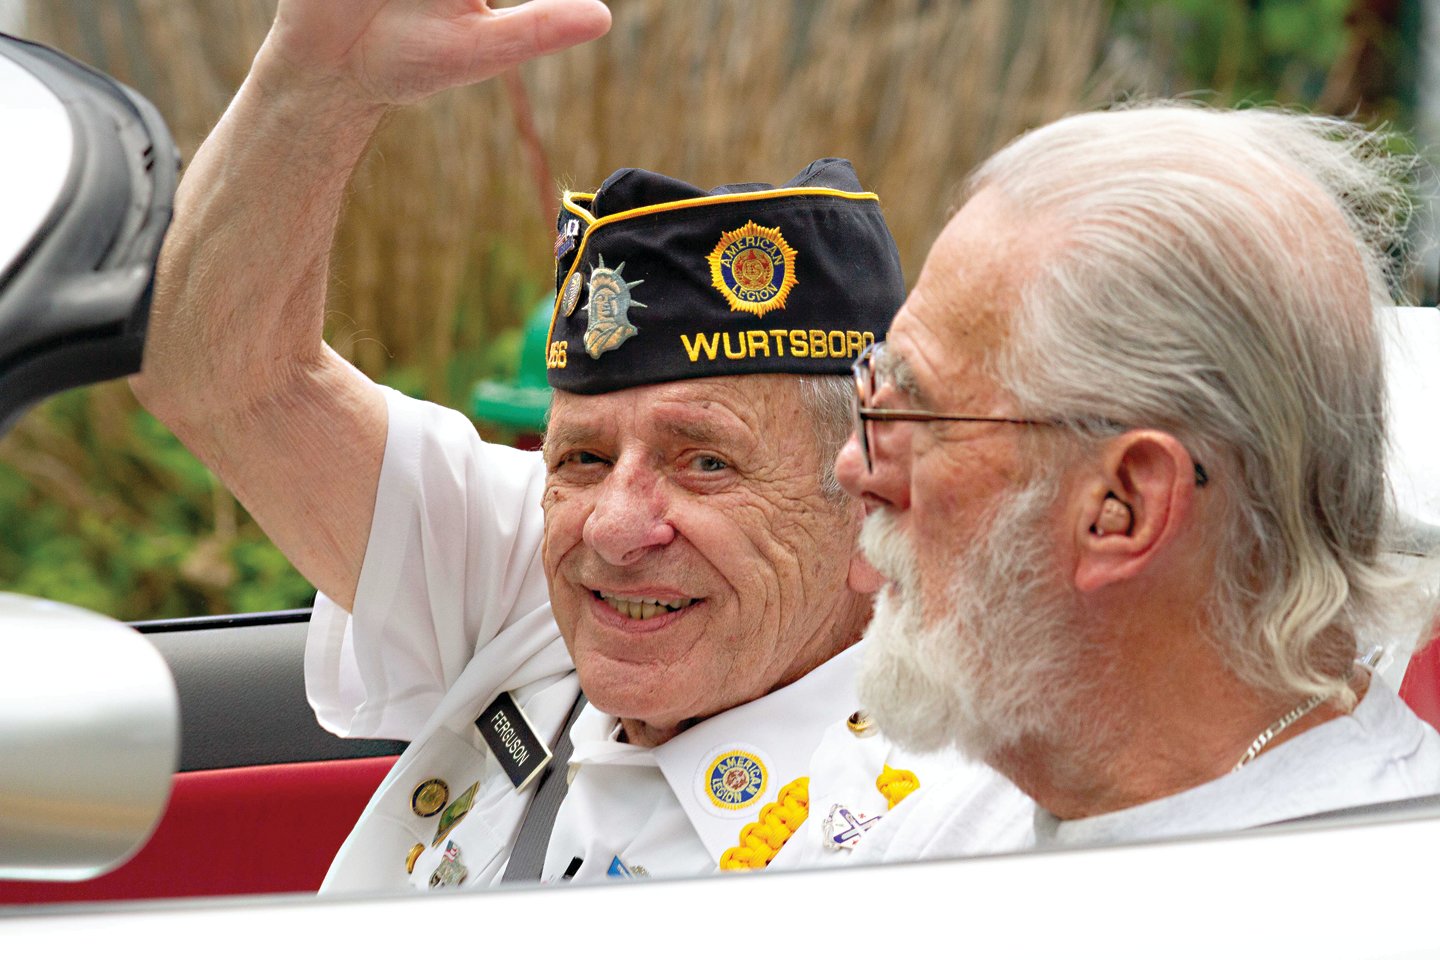 Grand Marshall of the parade, Tony Ferguson of the American Legion Post 1266, waved to the crowd during the Wurtsboro’s Memorial Day Parade while being driven by Jim Carney.